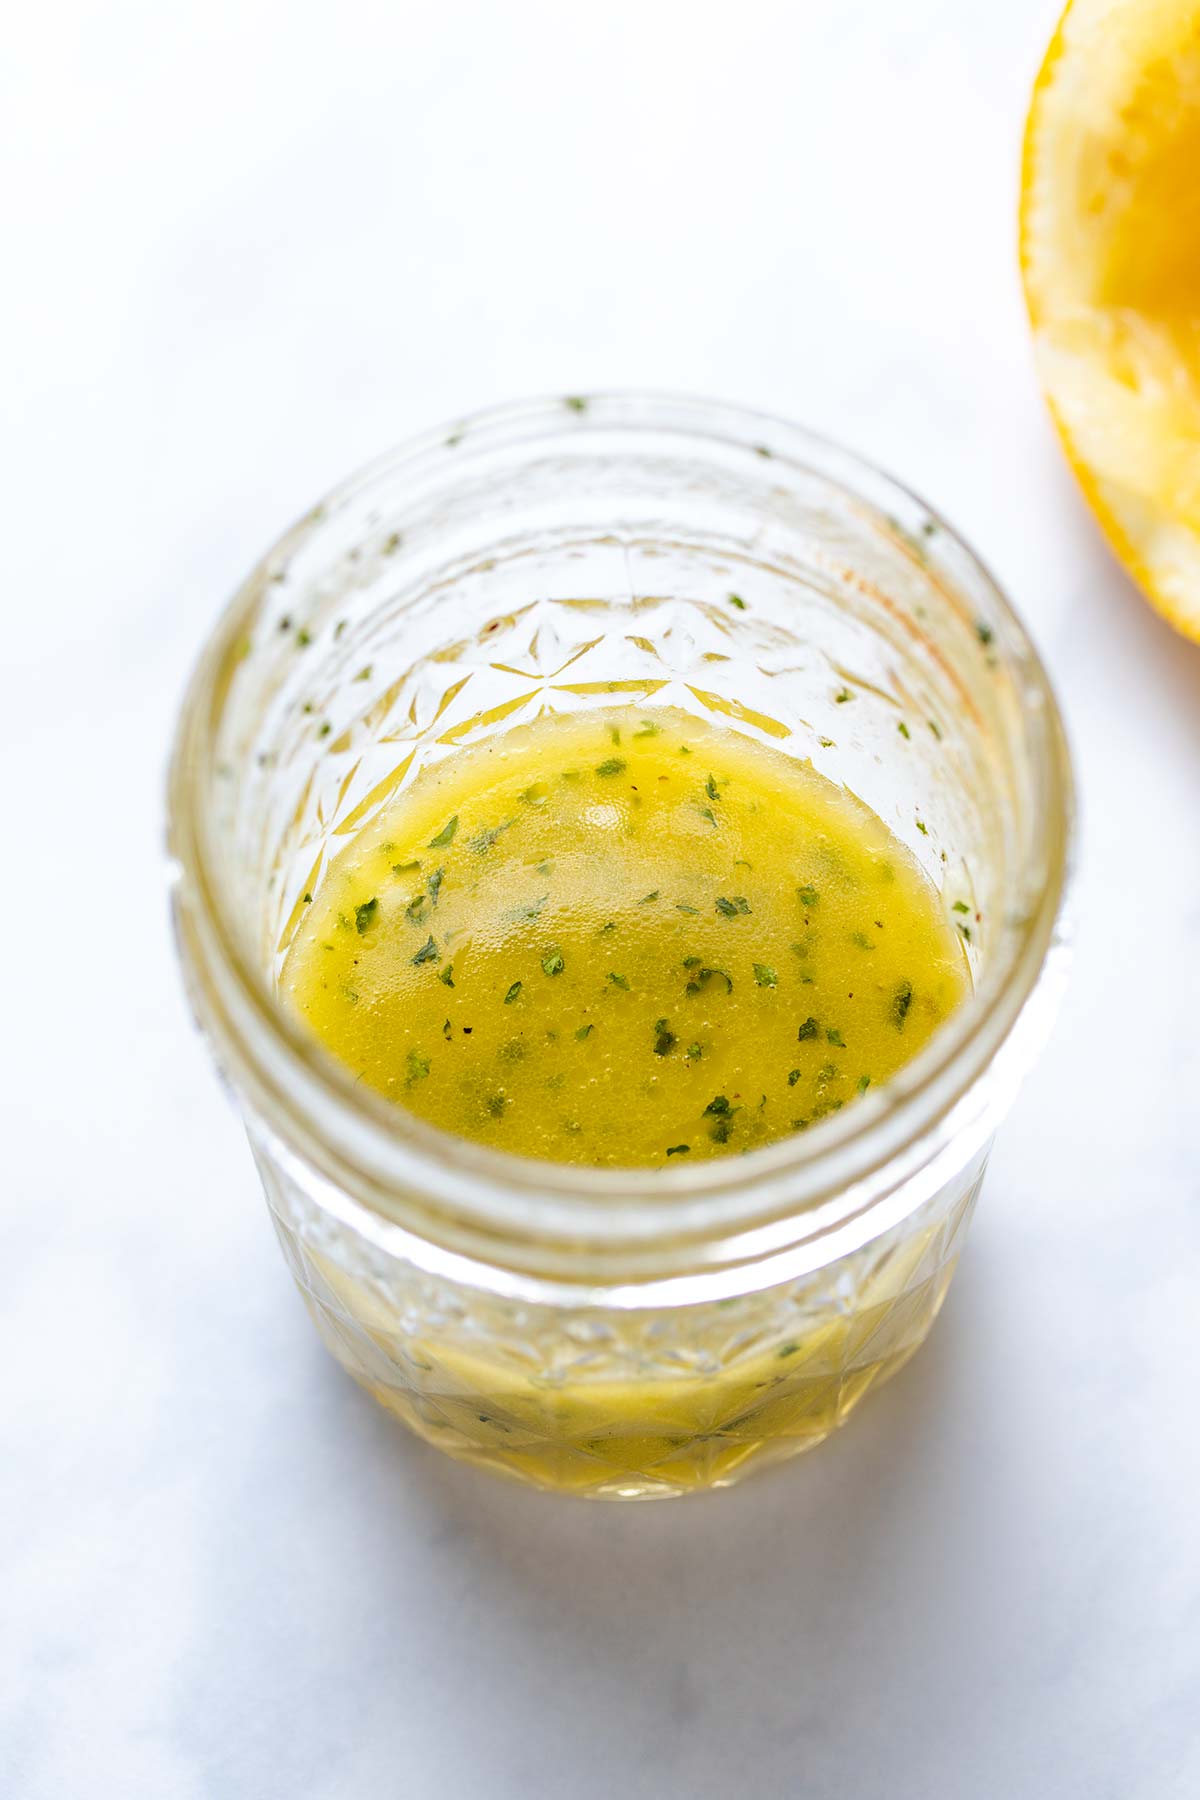 an olive oil and lemon dressing in a small mason jar next to half a squeezed lemon